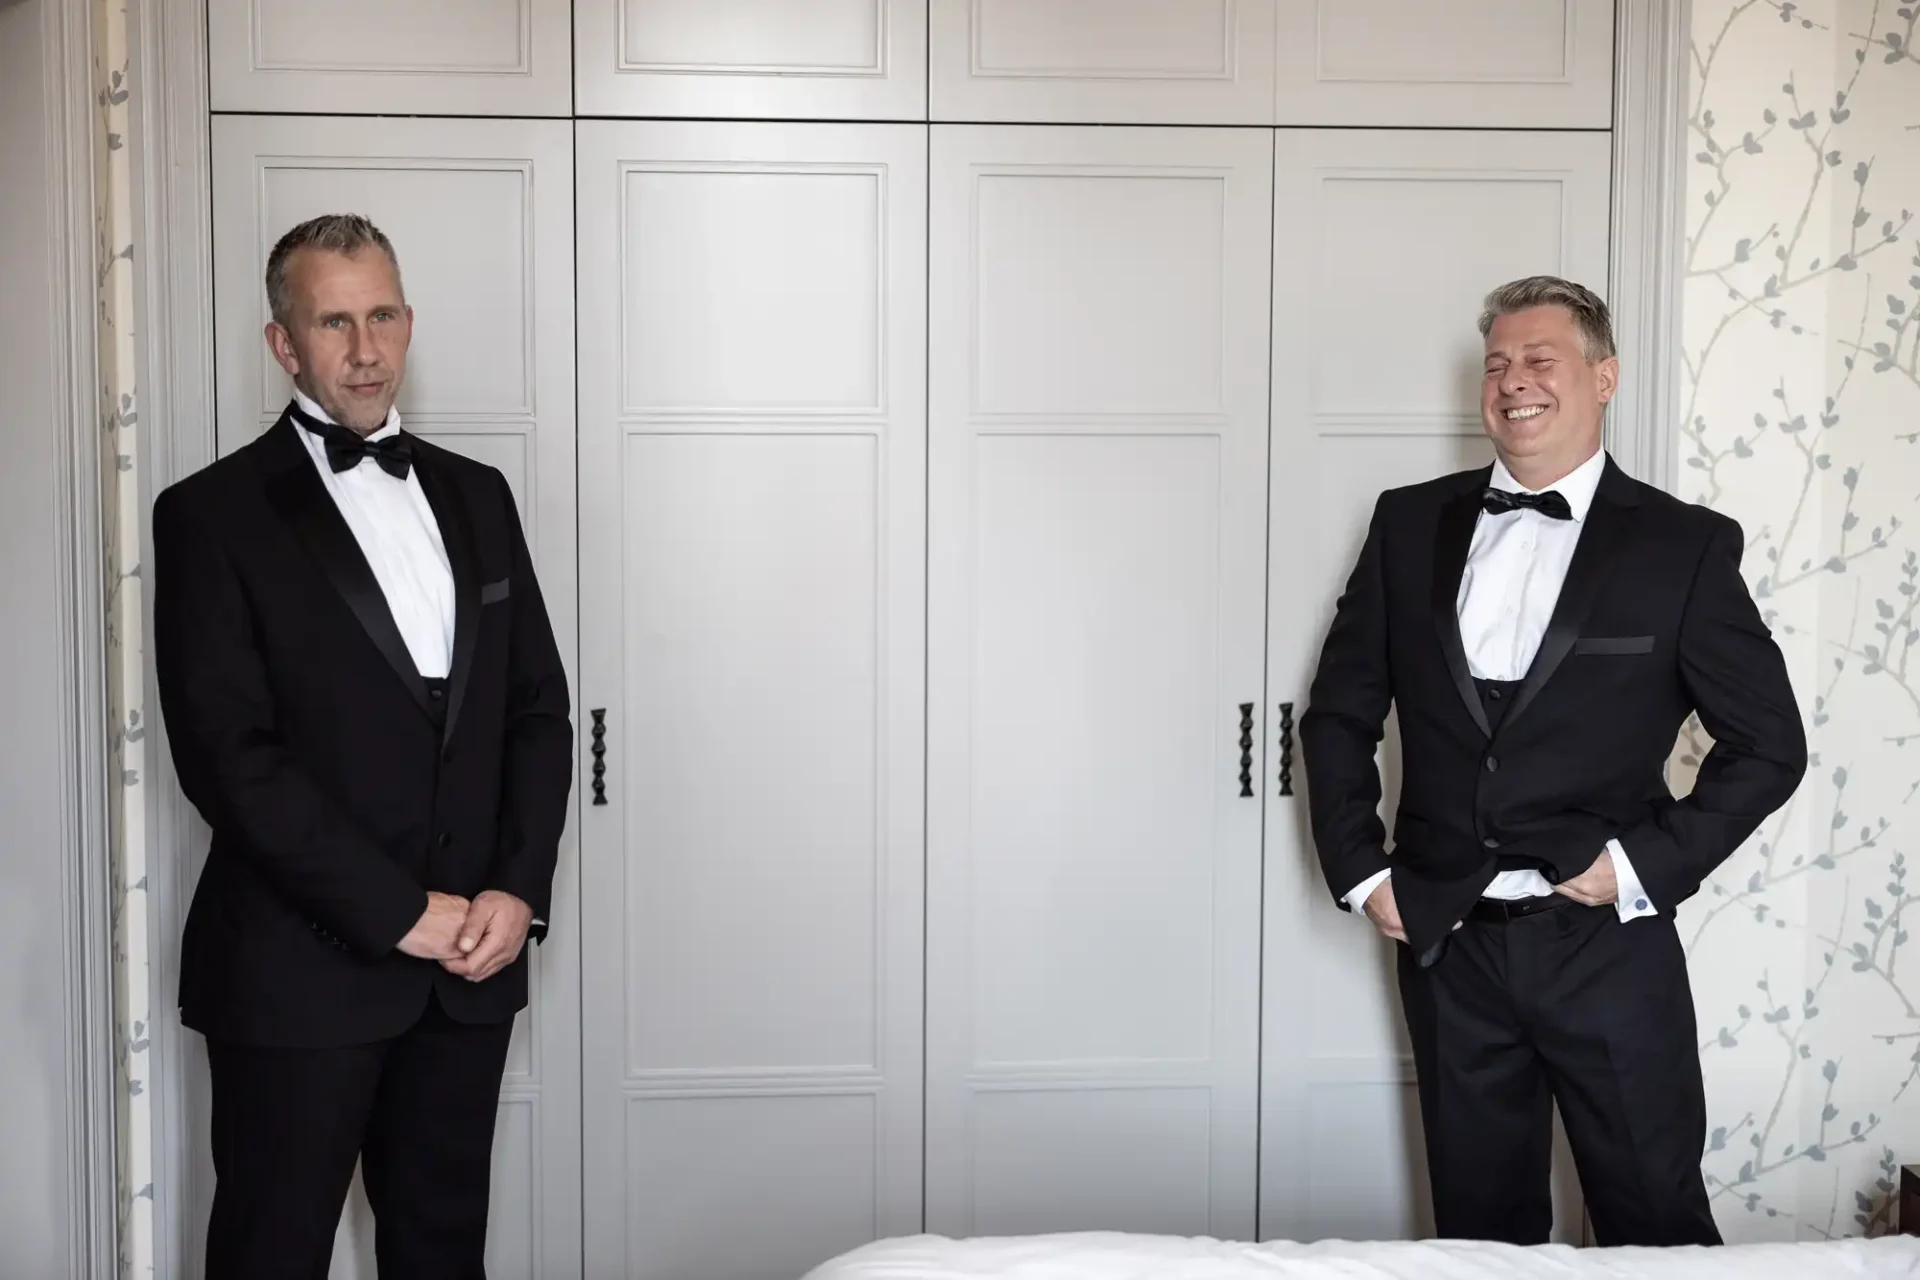 Two men in tuxedos smiling and standing apart against a white paneled wall in an elegantly decorated room.